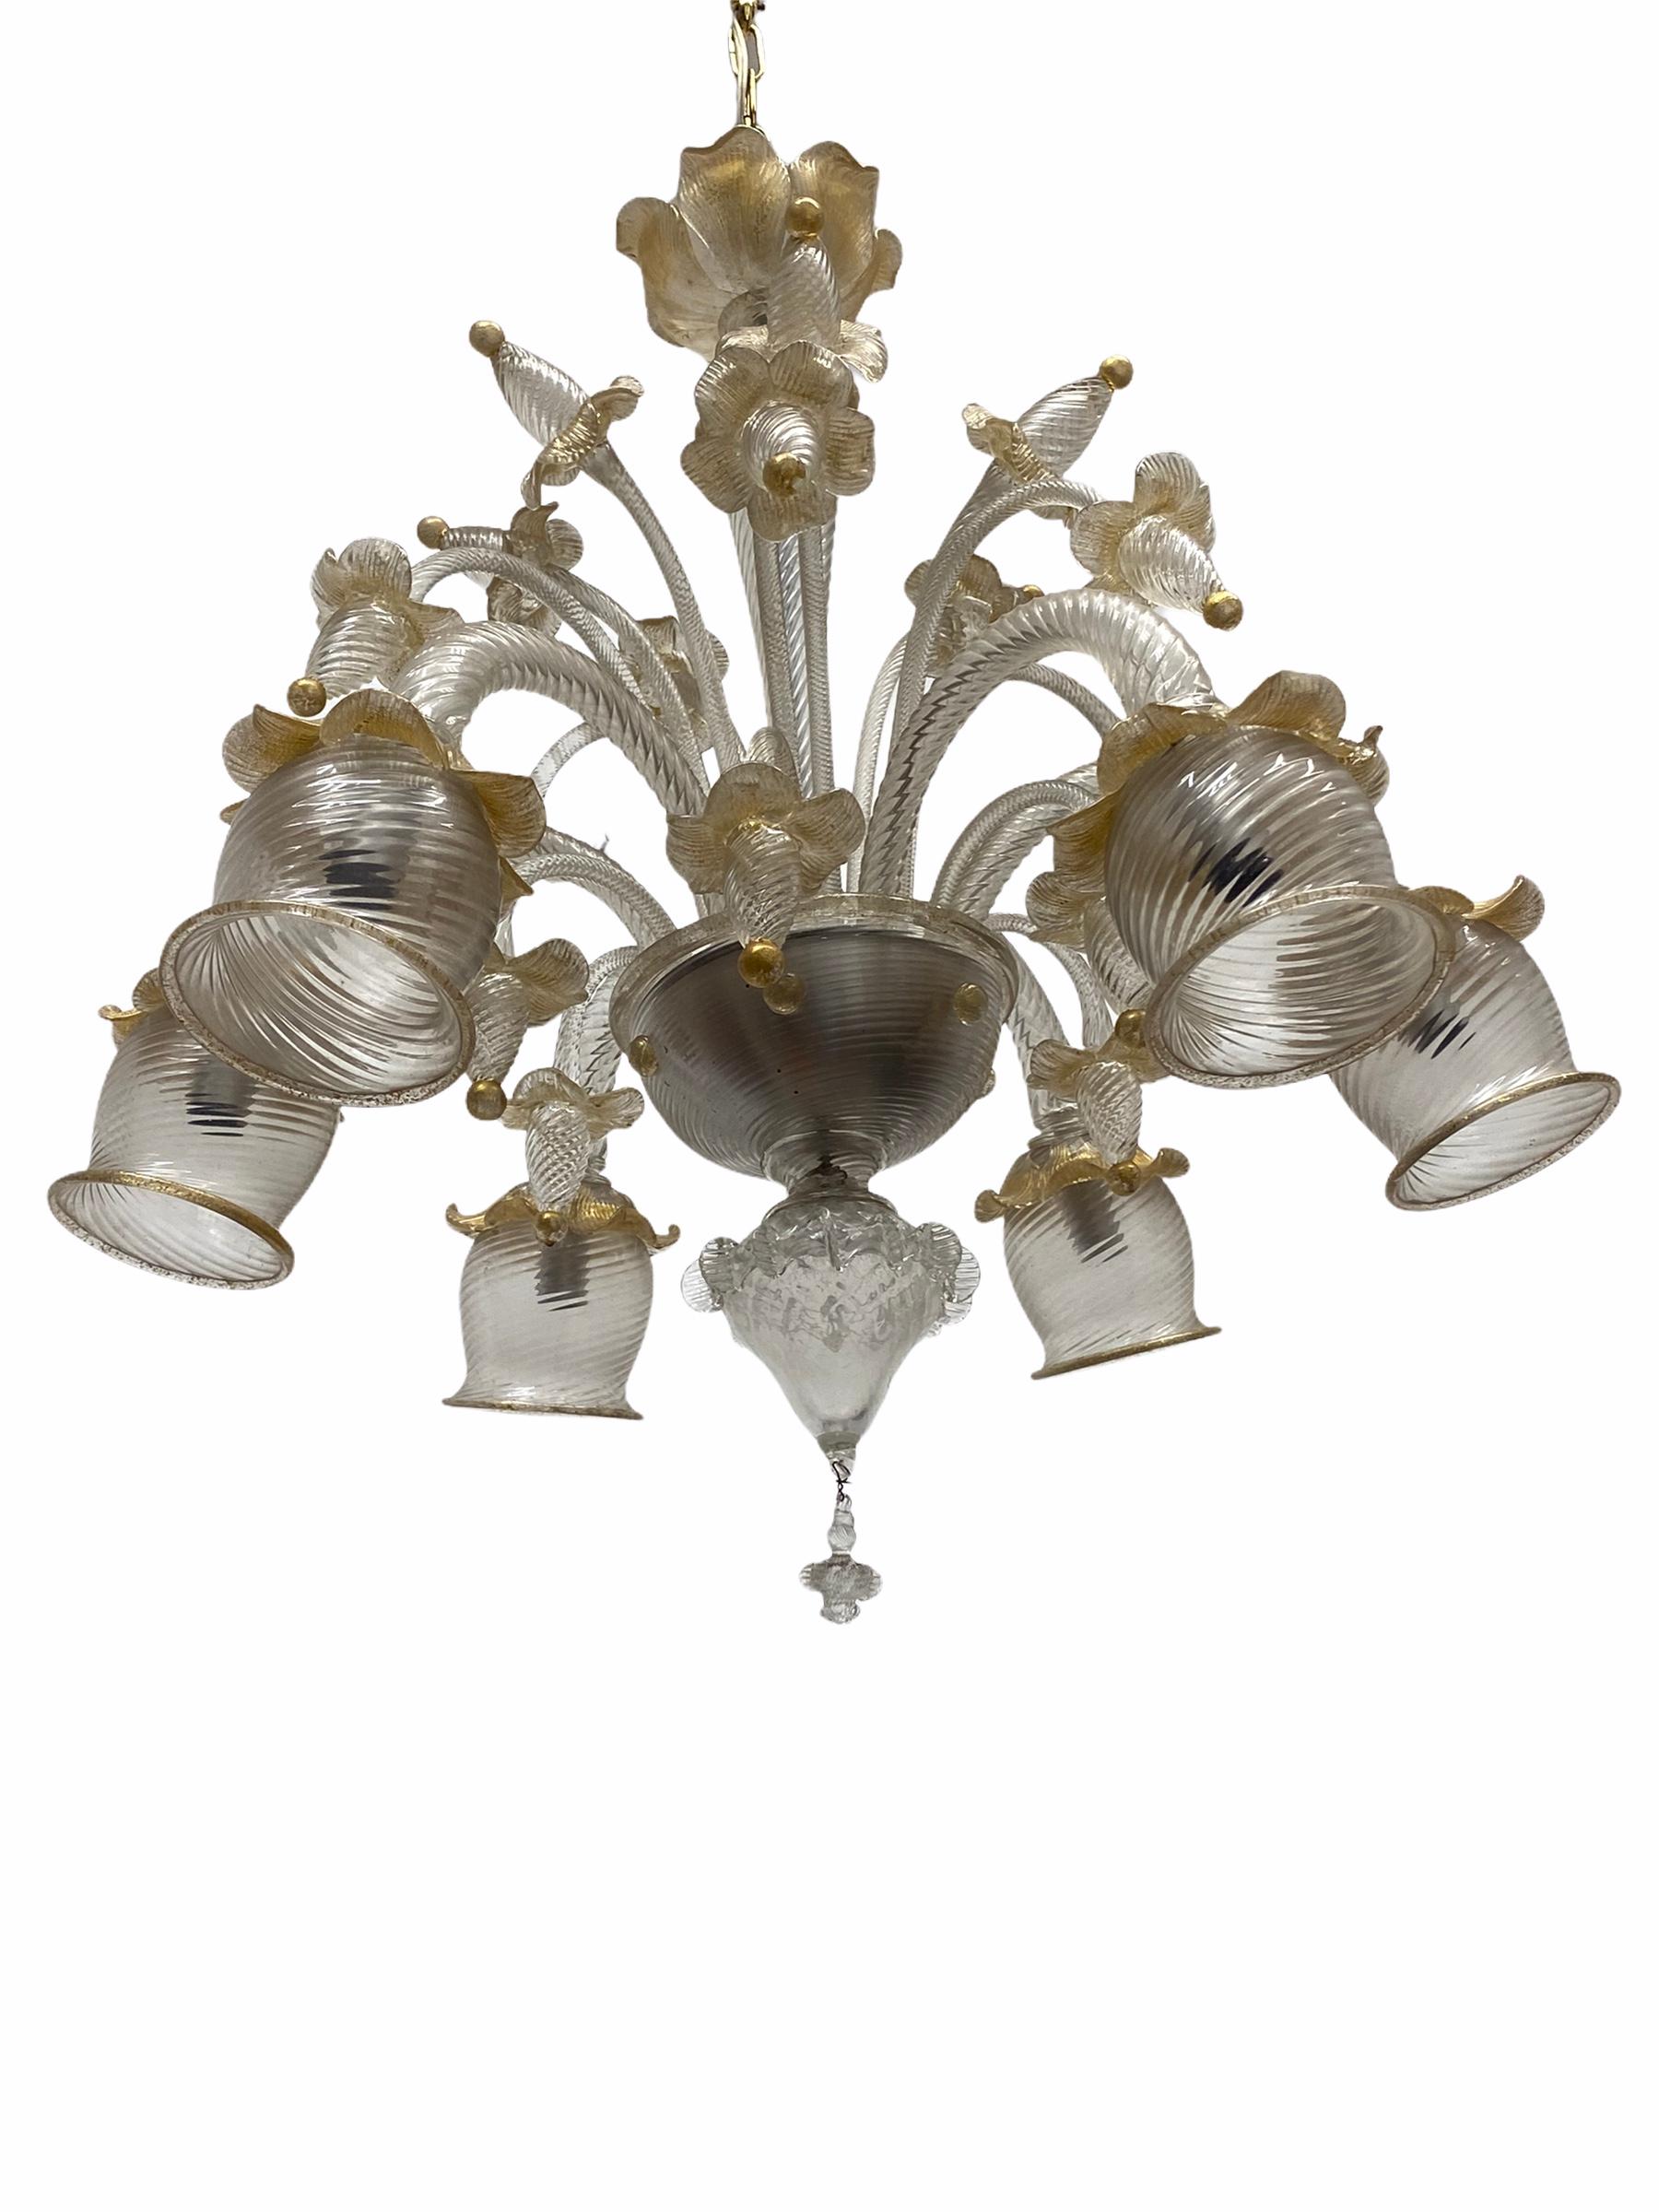 Stunning Gold Dusted Murano Chandelier, by Barovier Toso Murano, Italy, 1960s For Sale 1